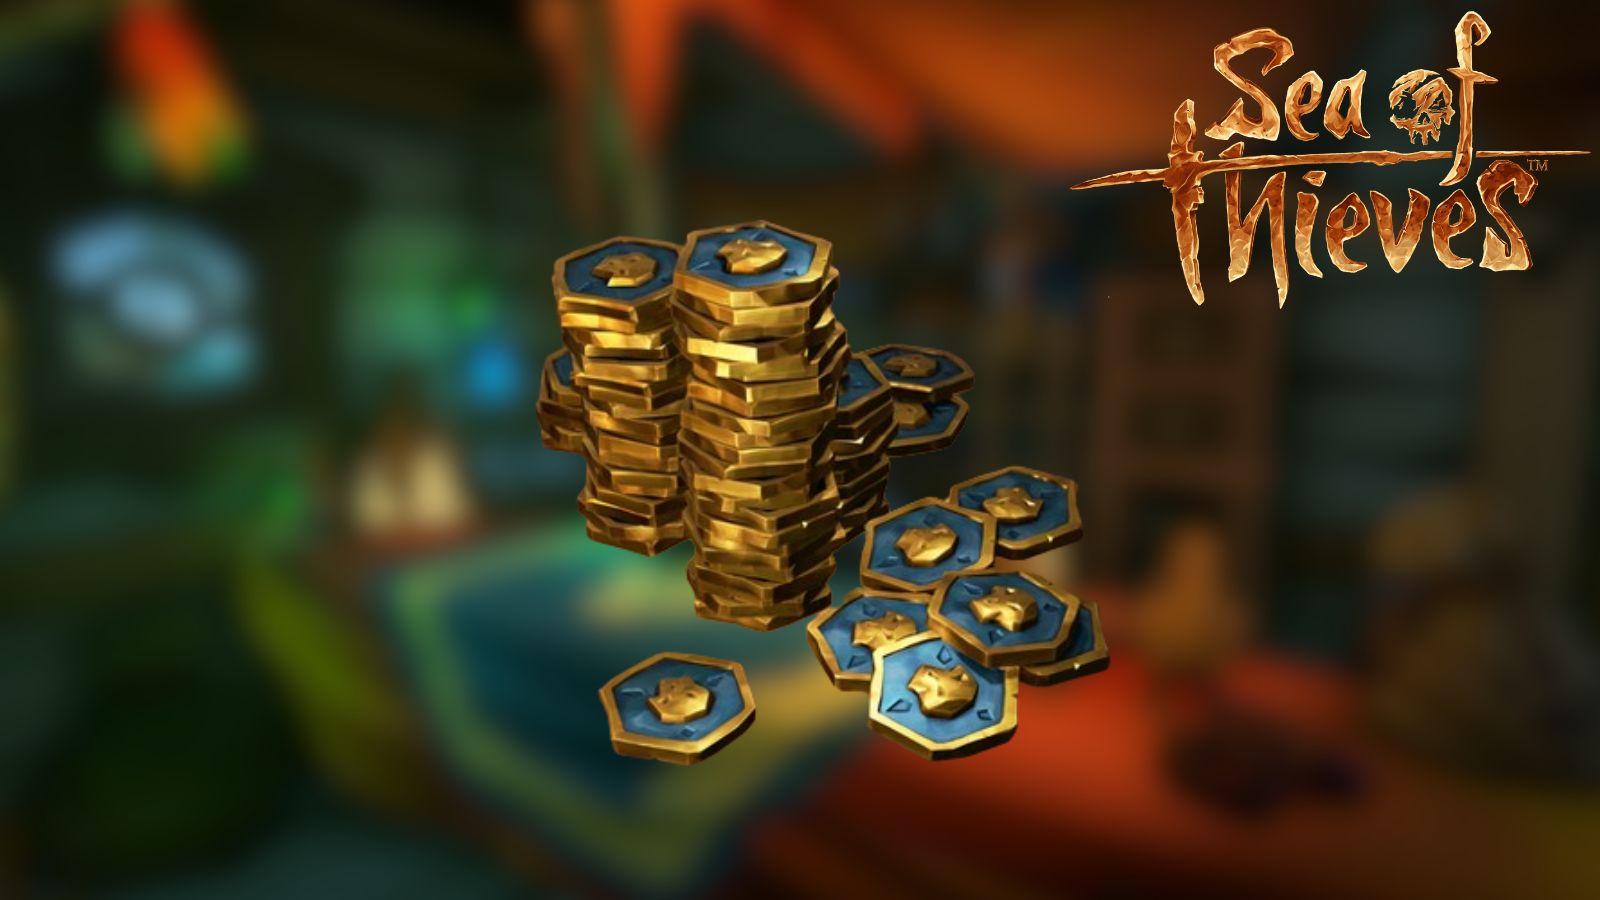 Sea of Thieves Ancient Coins